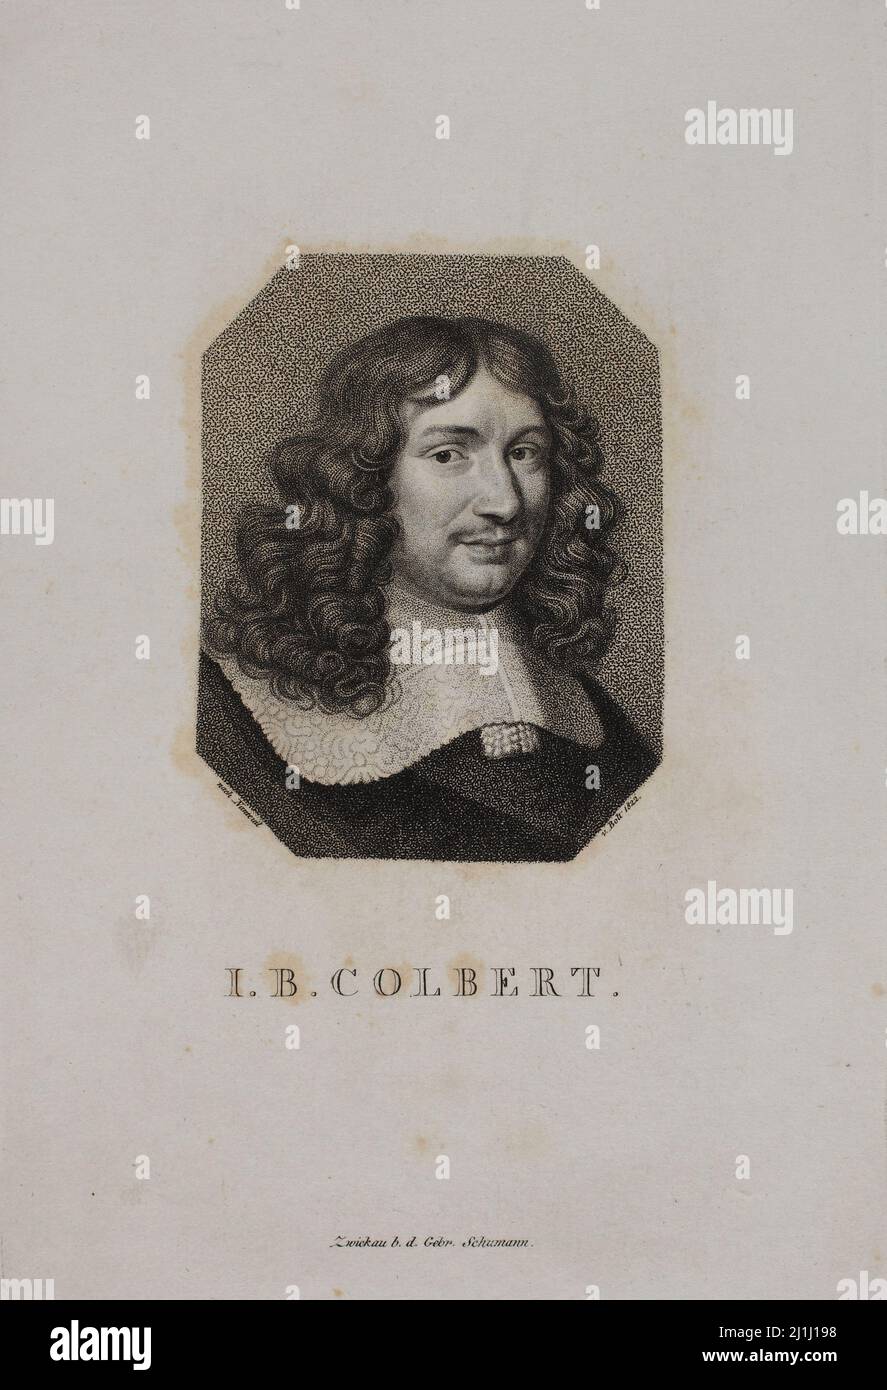 Engraving of Jean-Baptiste Colbert, 1820 Jean-Baptiste Colbert (1619-1683) was a French statesman who served as First Minister of State from 1661 unti Stock Photo